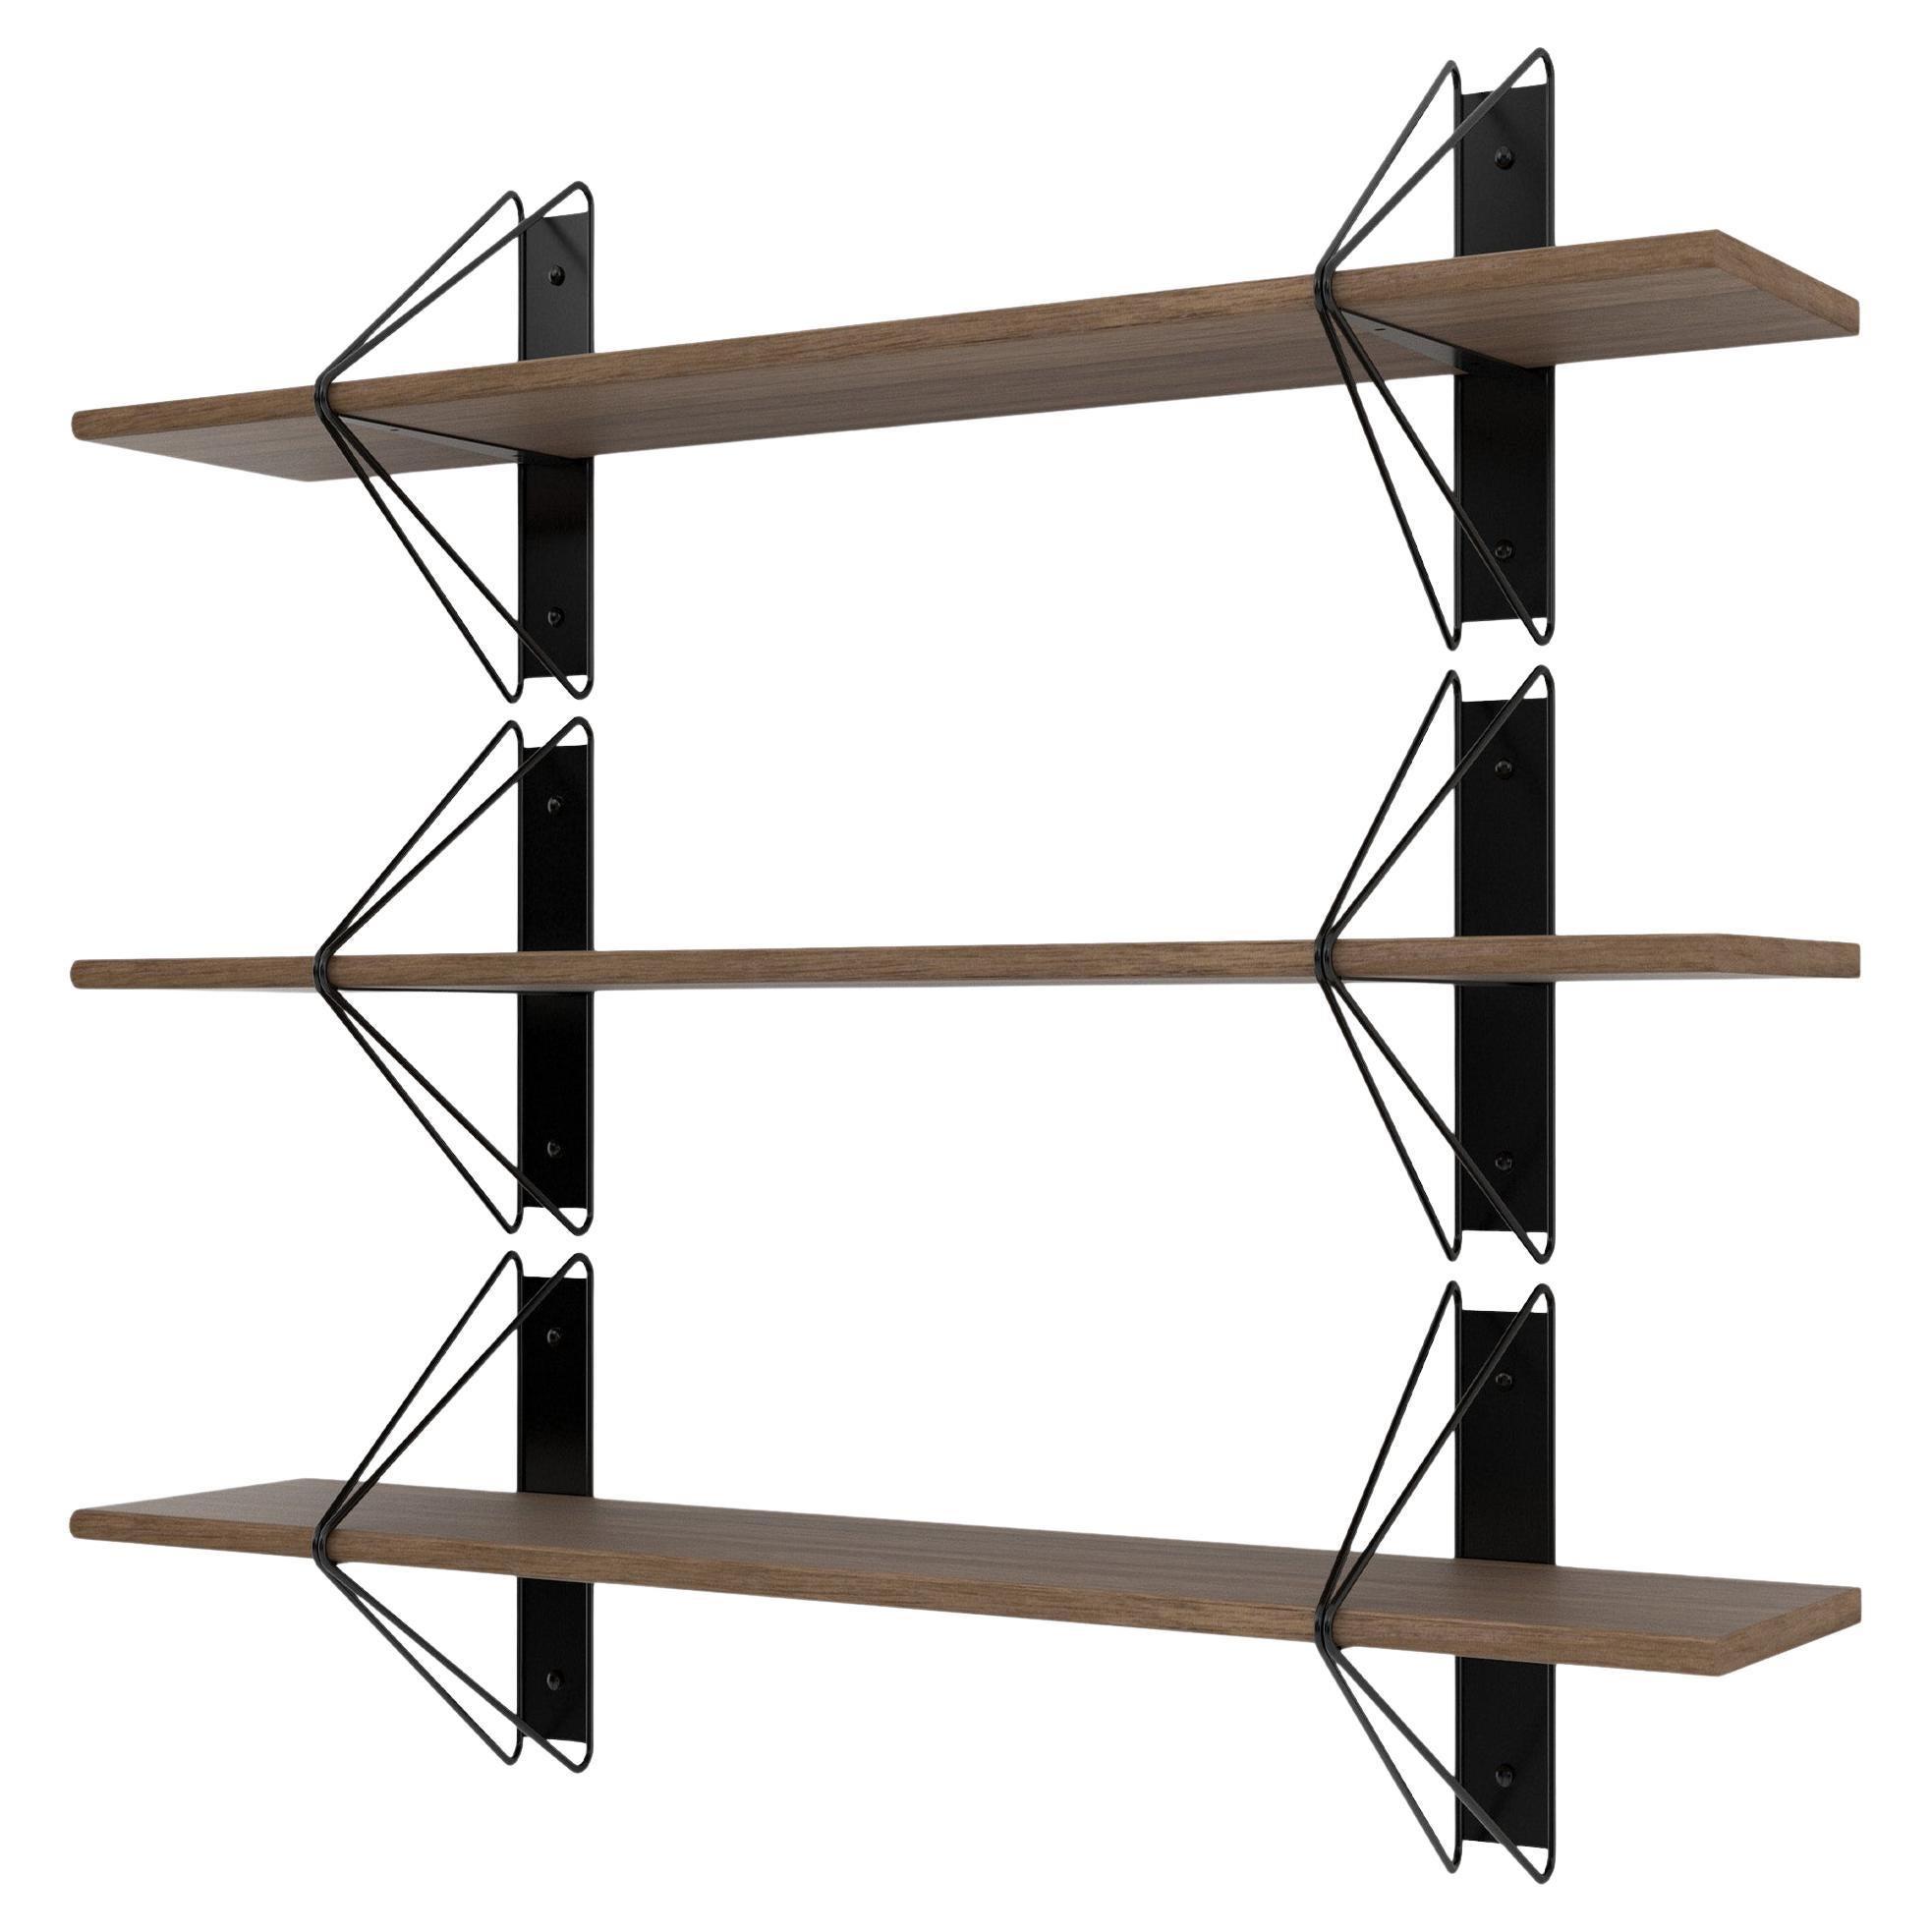 Set of 3 Strut Shelves from Souda, Black and Walnut, Made to Order For Sale